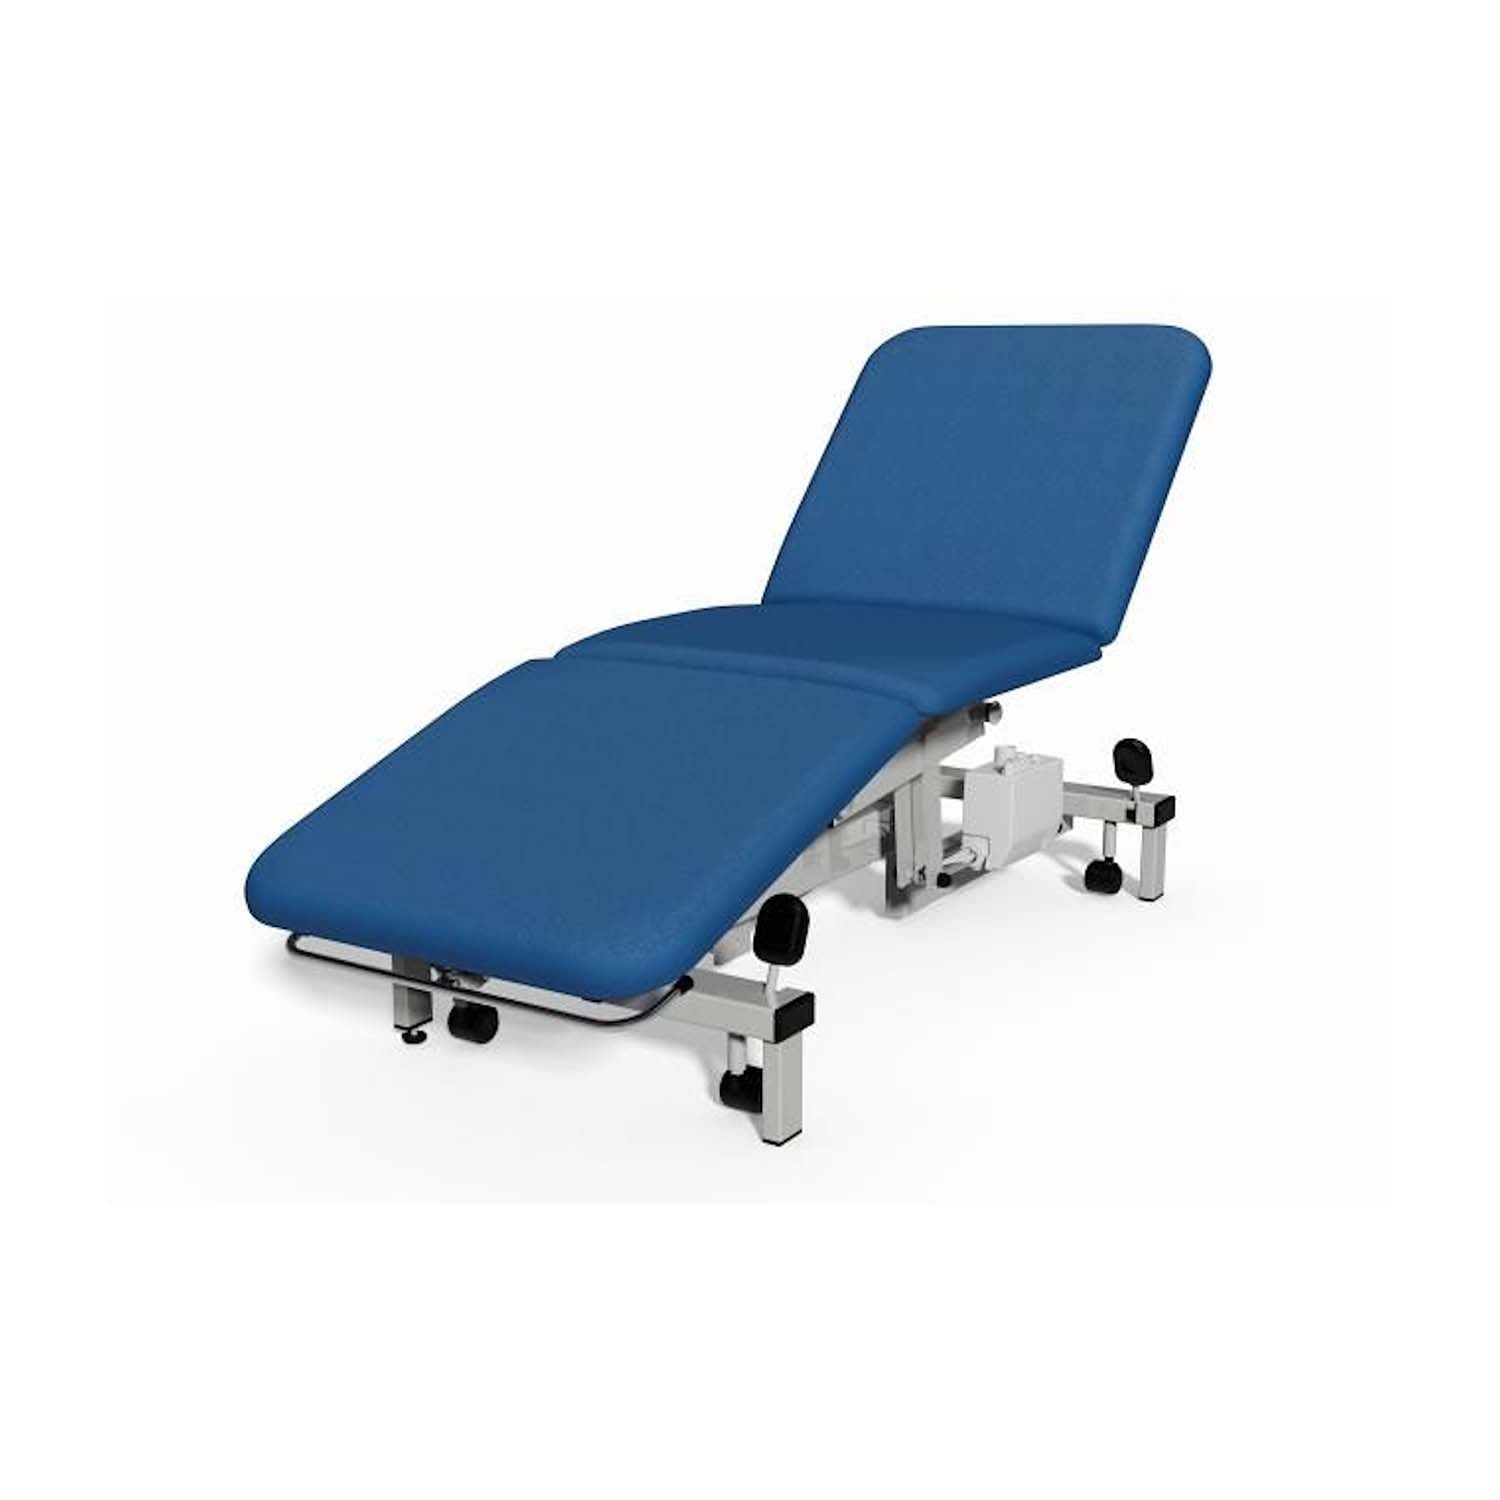 Plinth 2000 Model 503 3 Section Examination Couch | Hydraulic | Lupin